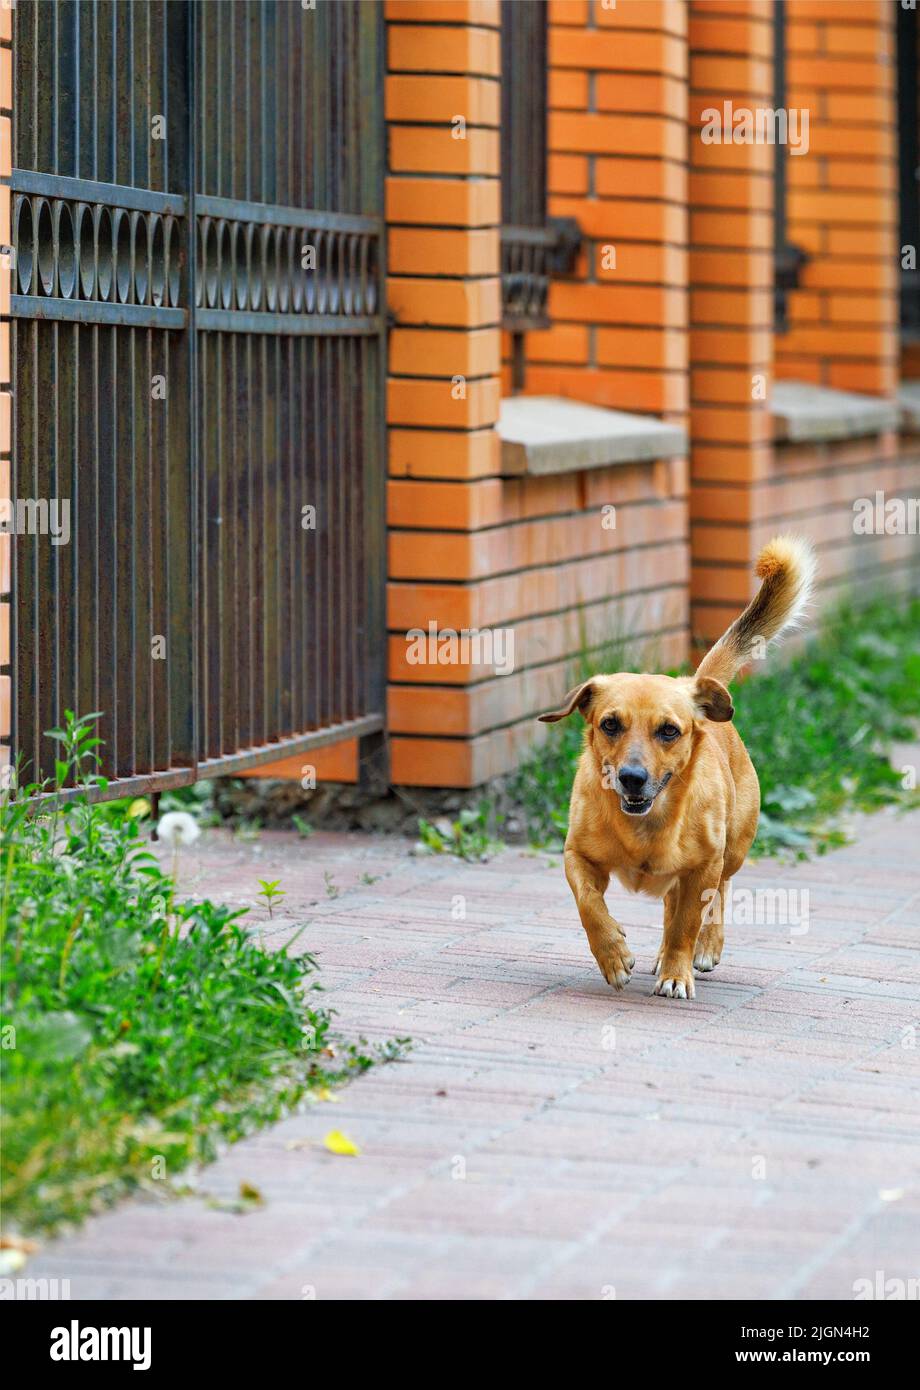 In summer, a red-haired mongrel runs merrily along the sidewalk along the orange brick fence. Vertical image. Copy space. Stock Photo